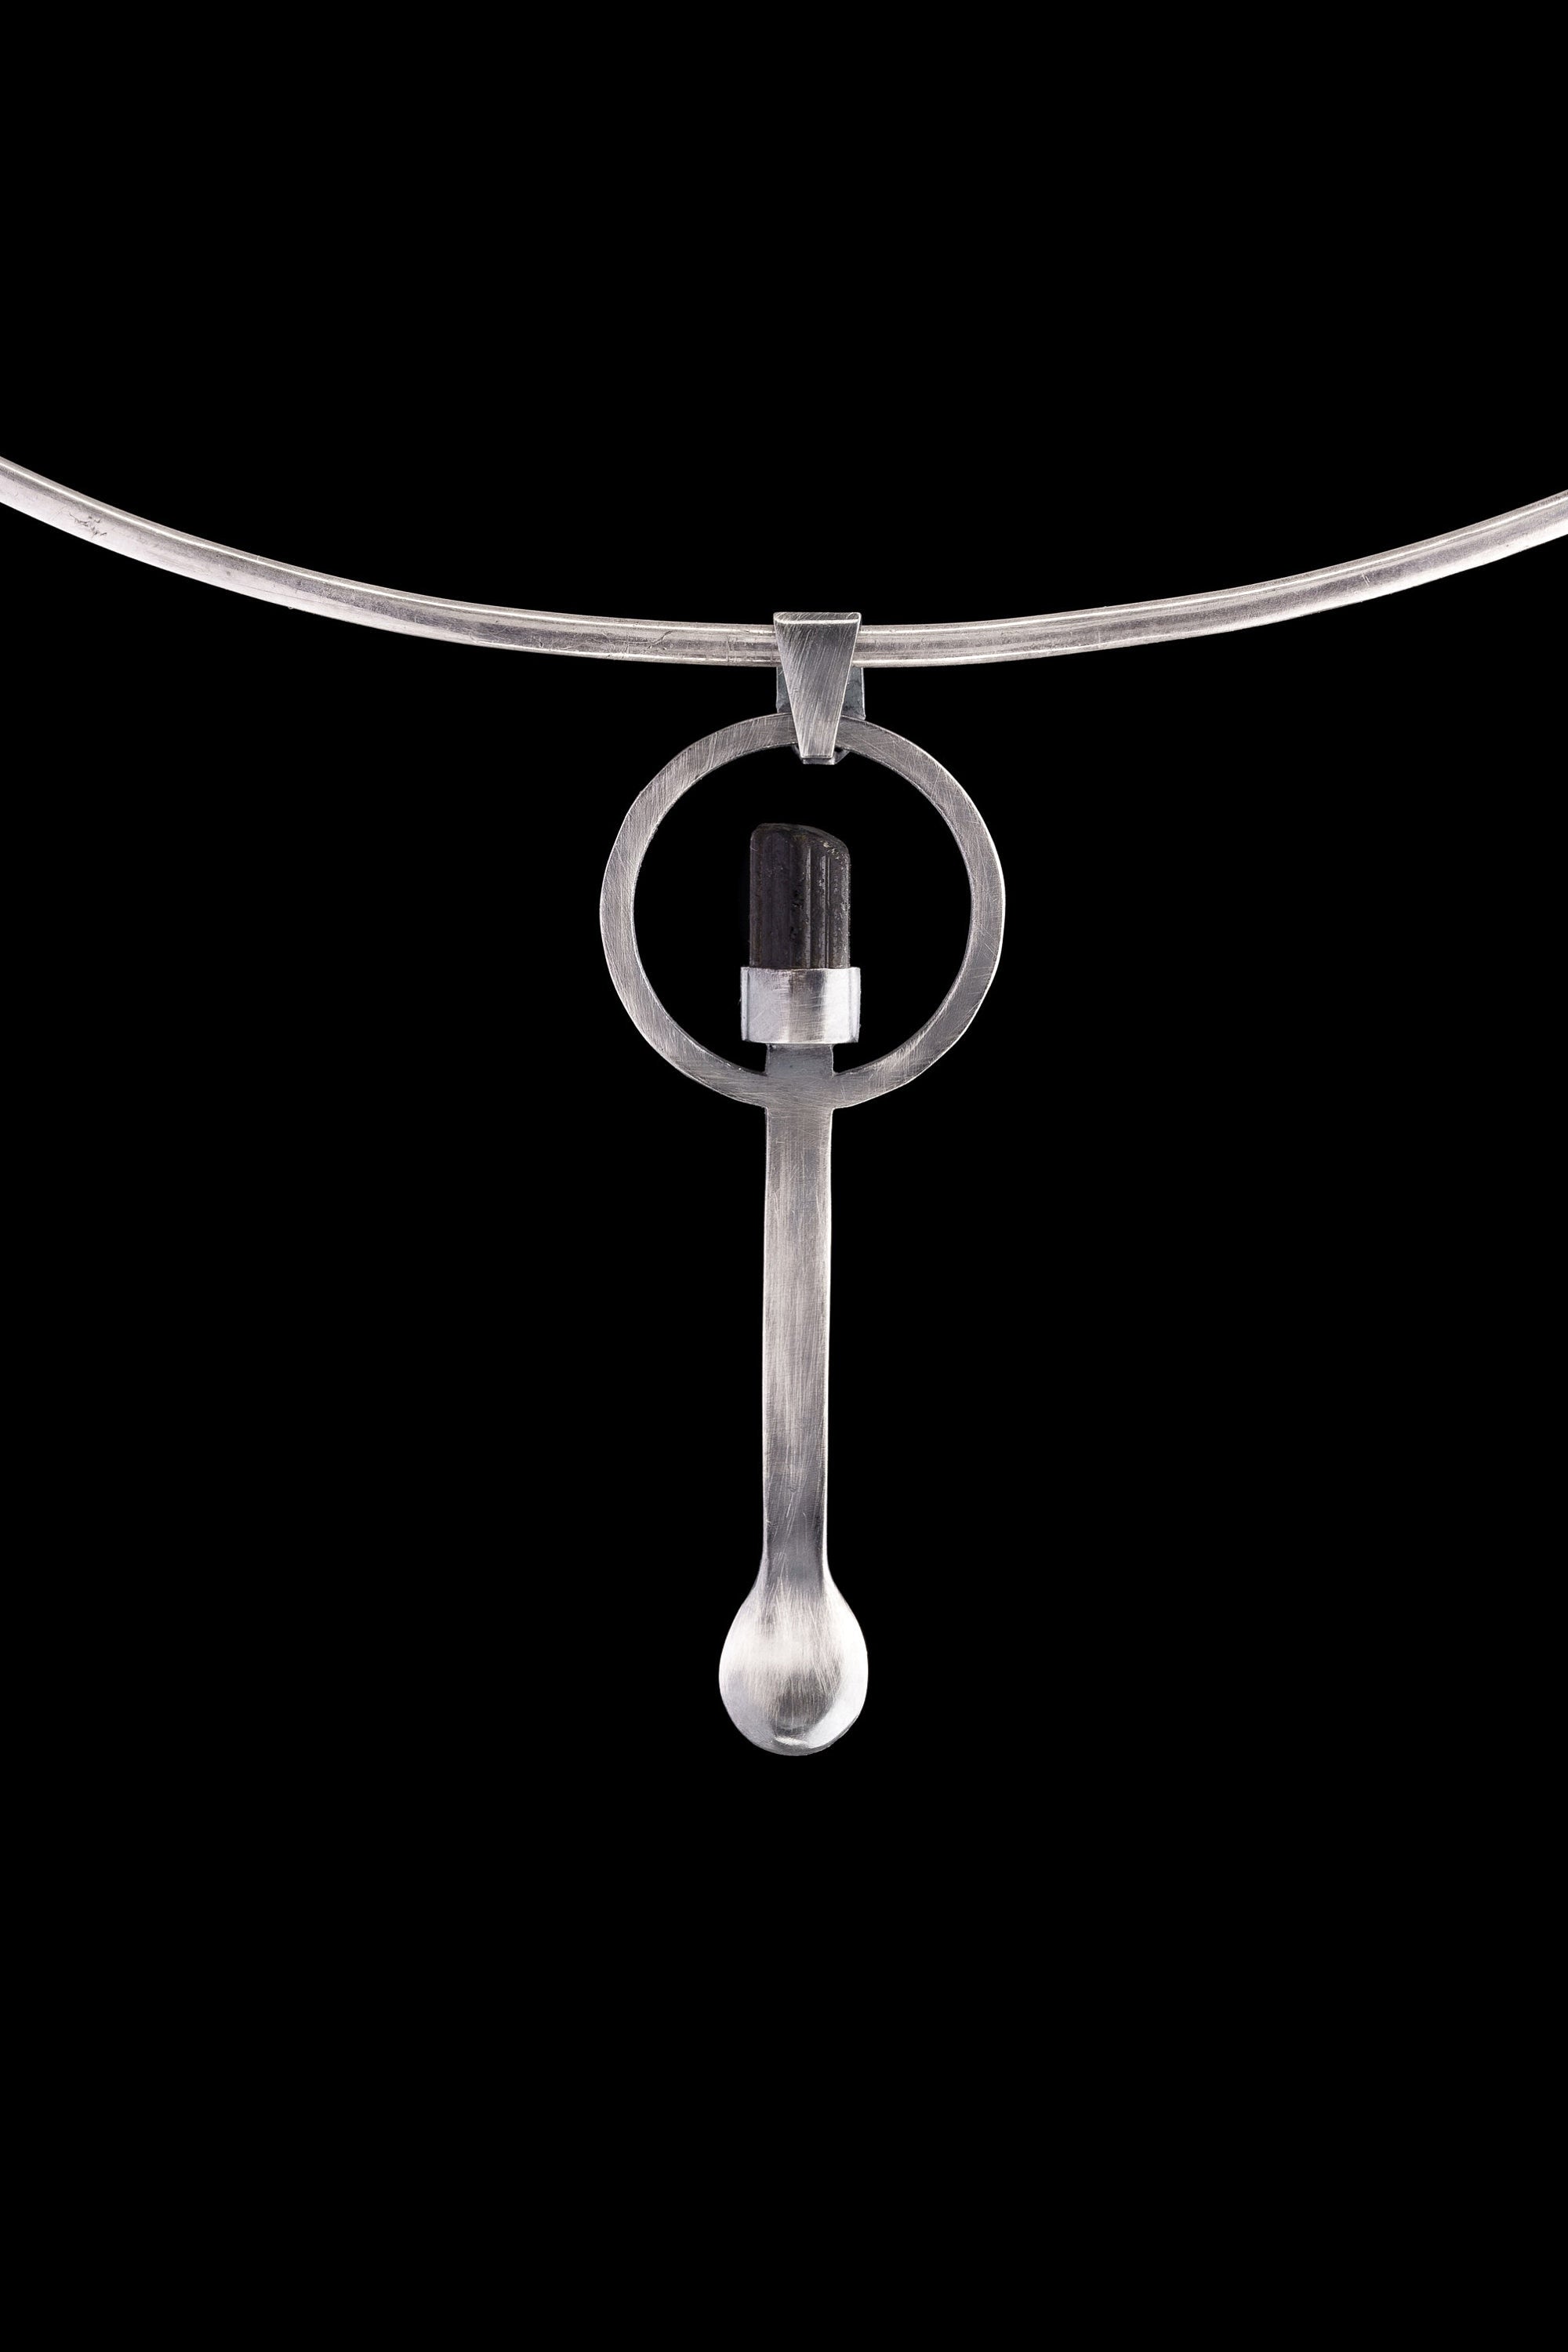 Black Tourmaline - Small Spice / Ceremonial Spoon - Solid 925 Cast Silver - Oxidised & Brush Textured - Crystal Pendant Necklace